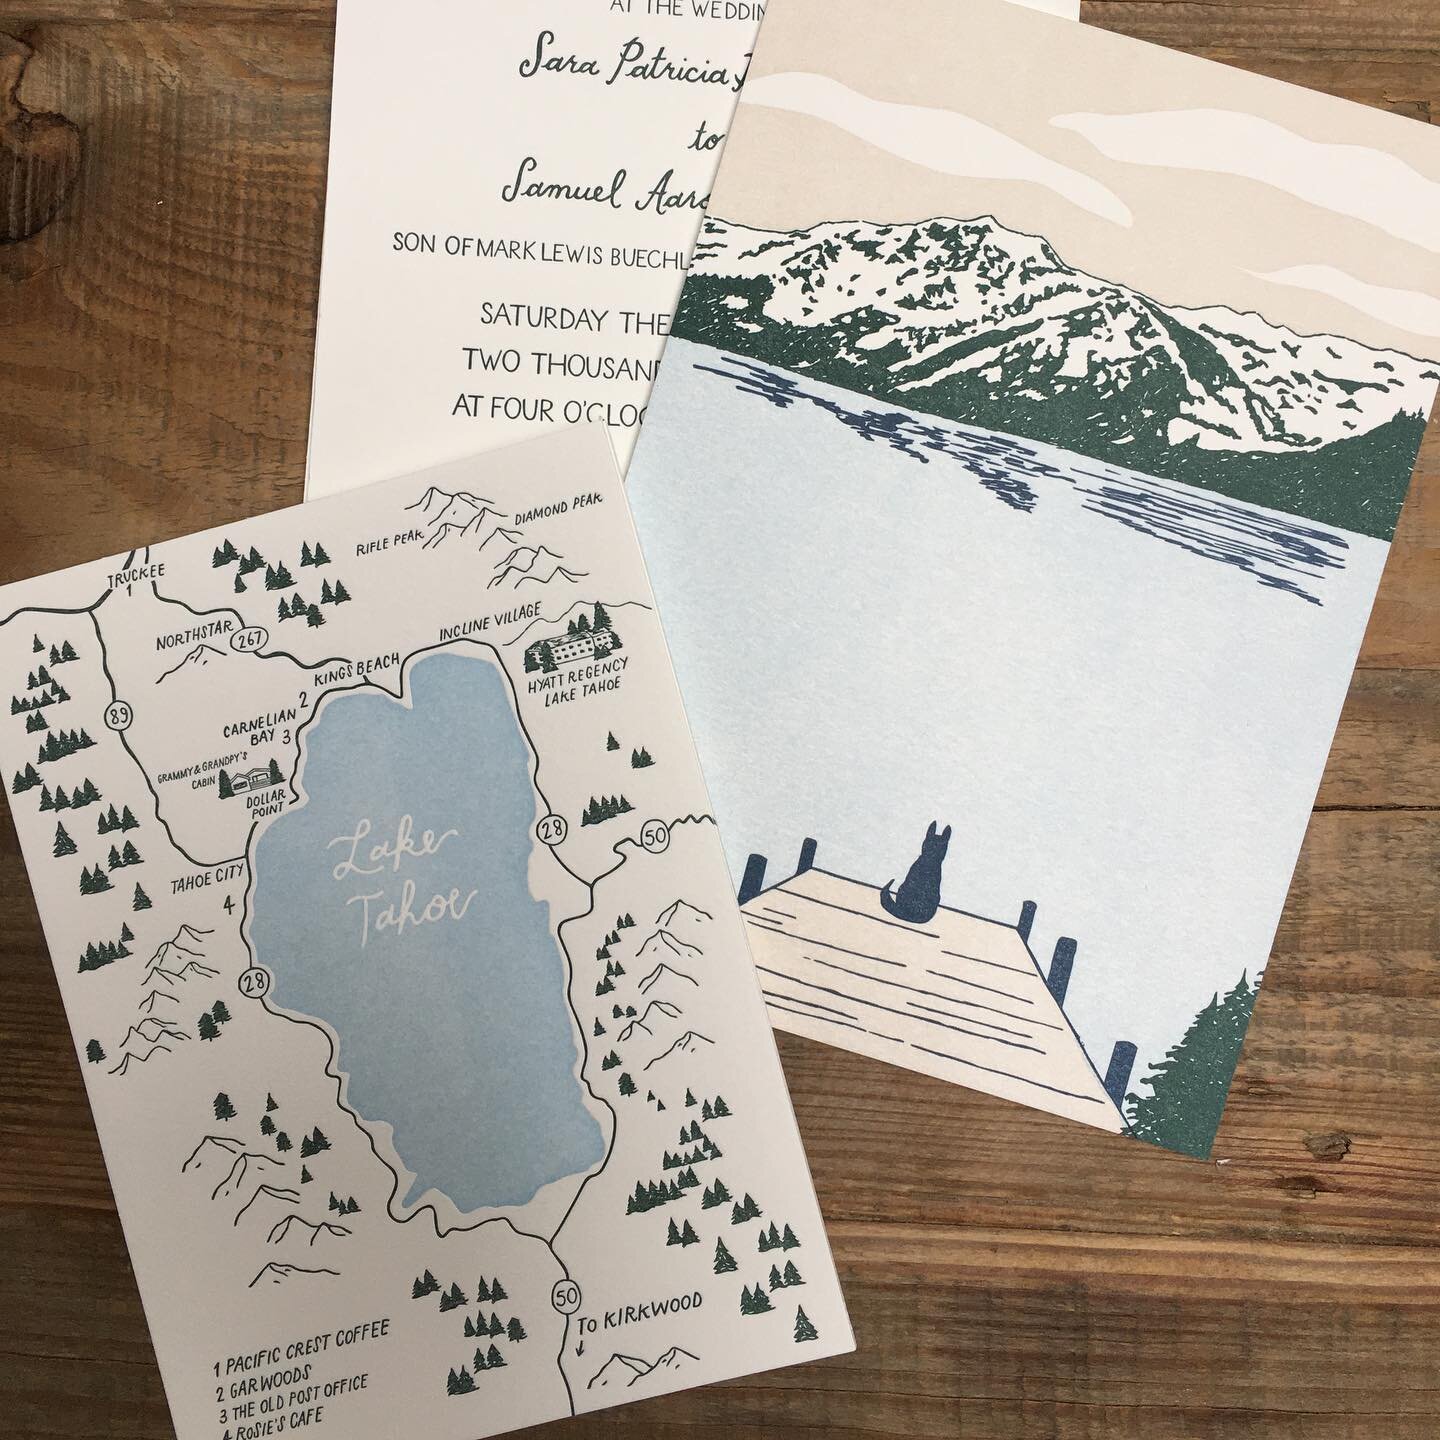 Feeling this wintry scene today and daydreaming of Tahoe trips. 

#letterpressweddinginvitations #letterpressmaps #letterpress